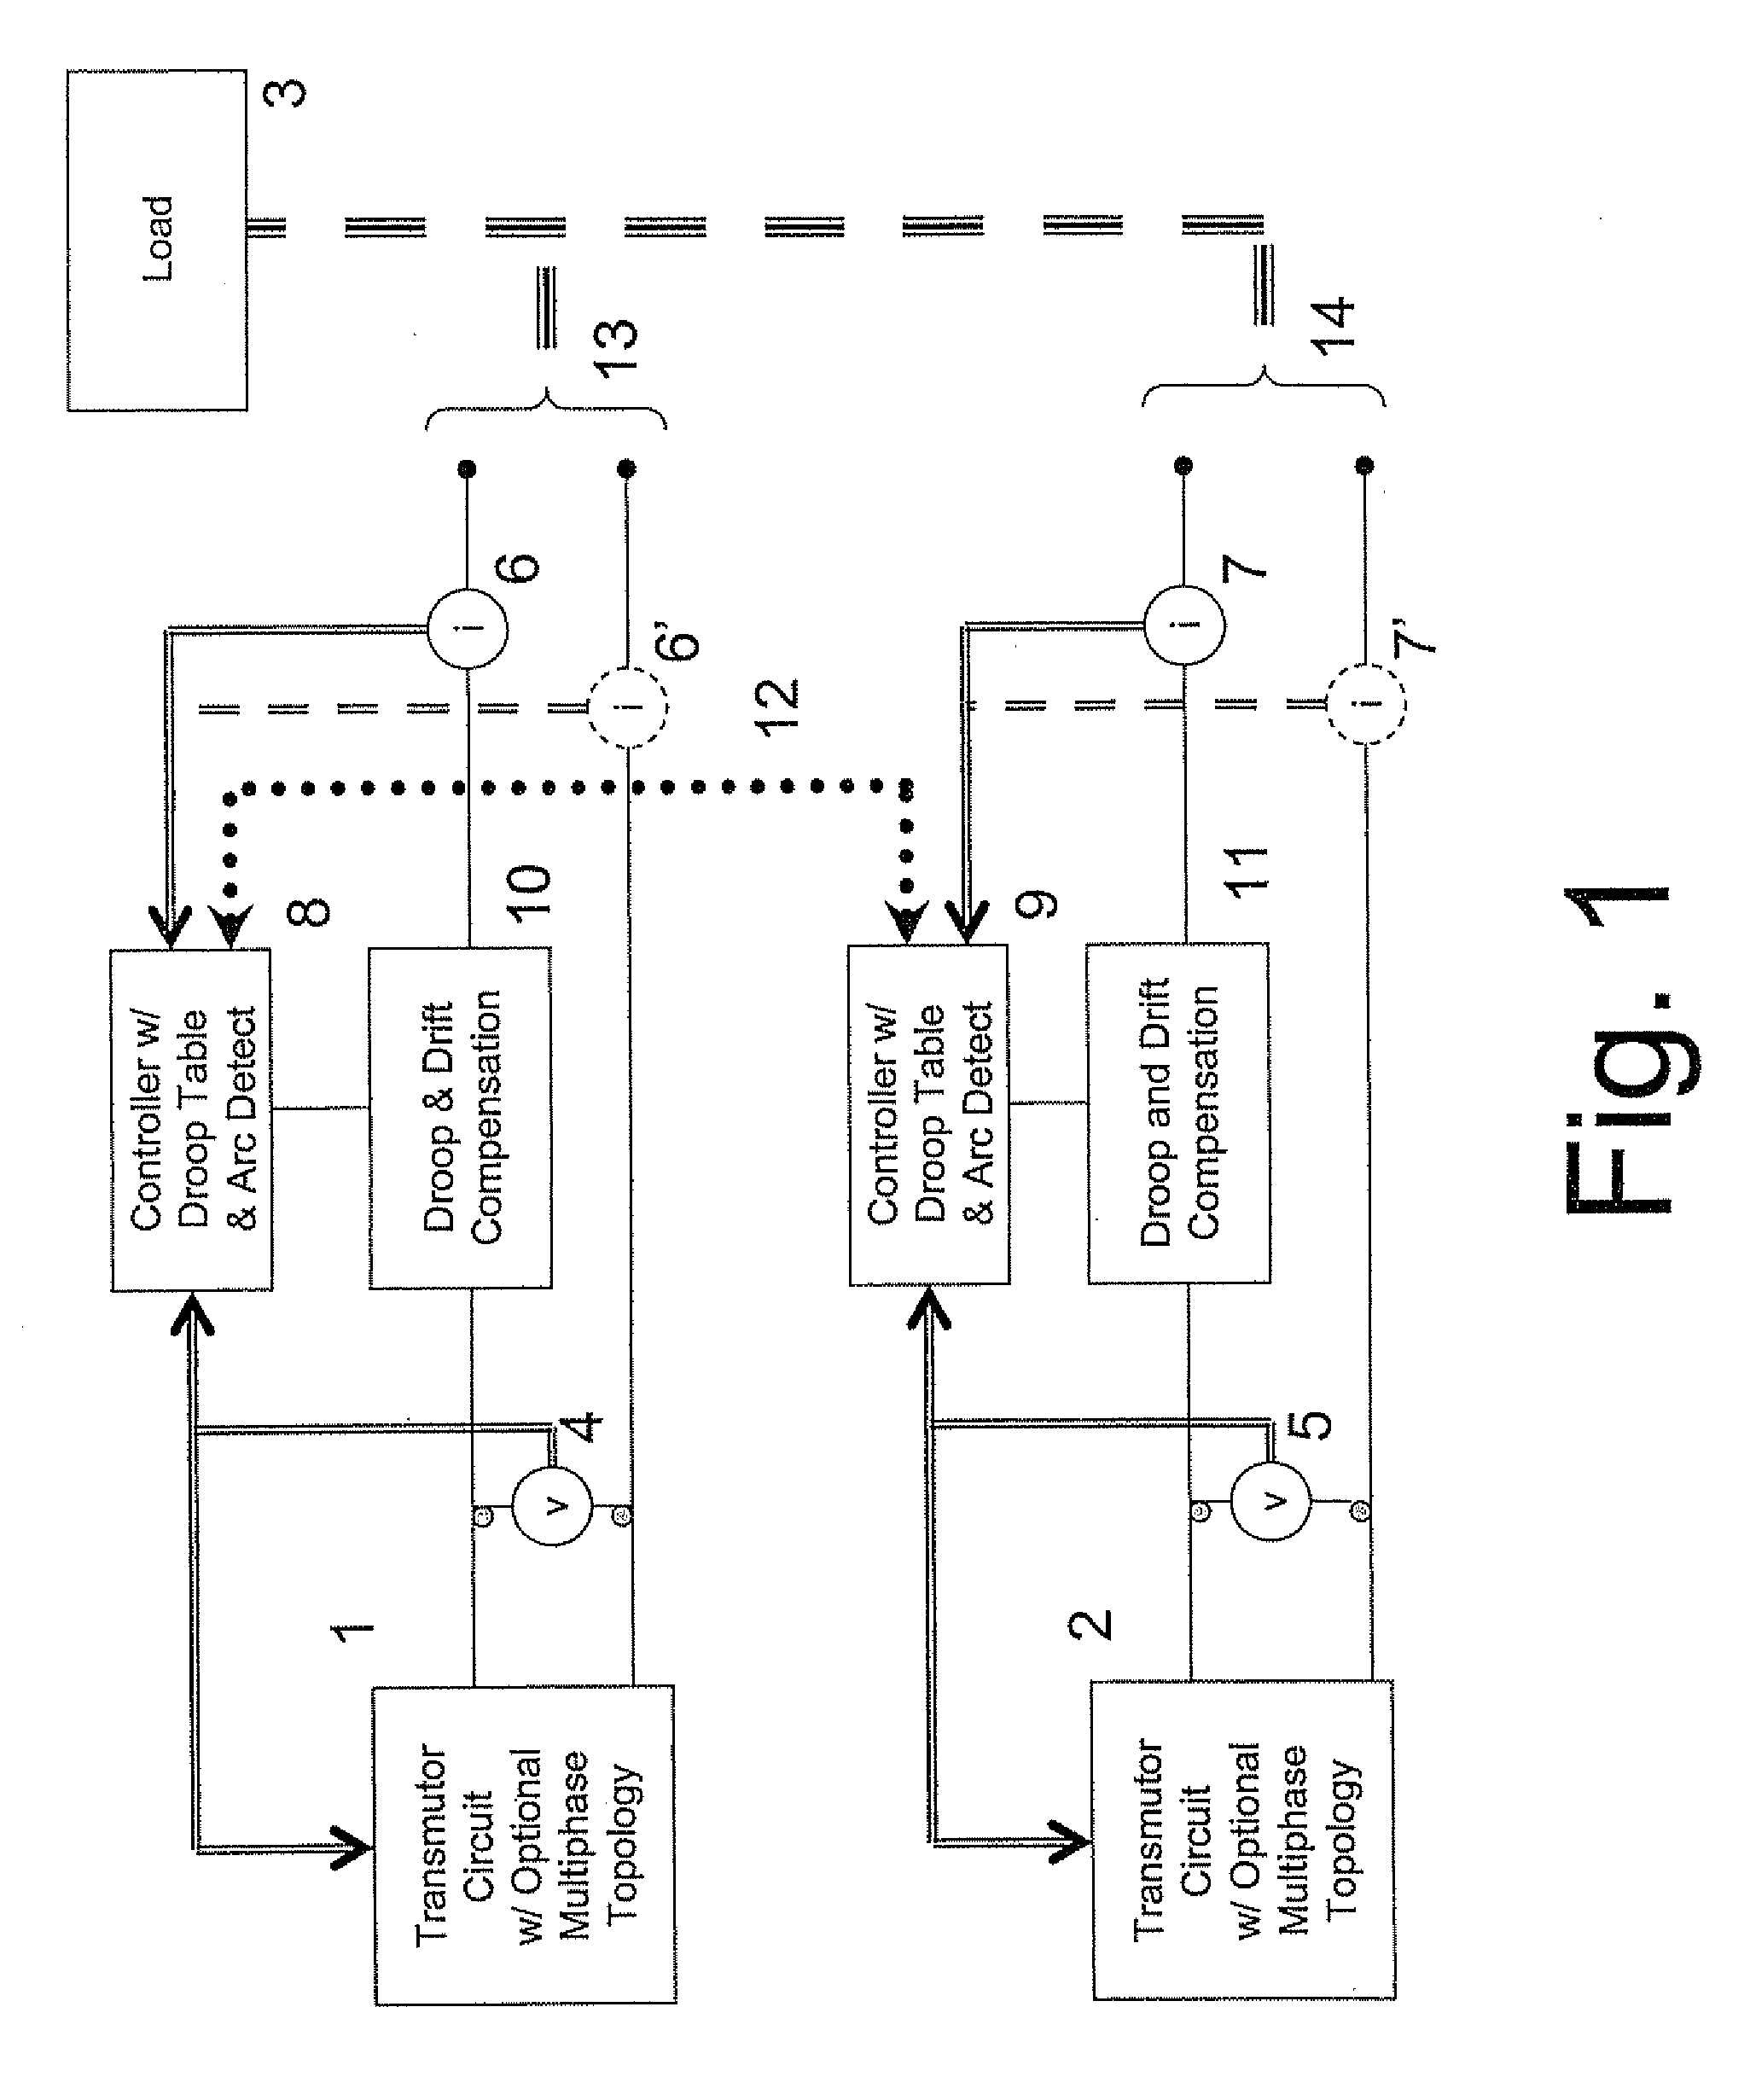 Direct current power supply for mission critical applications